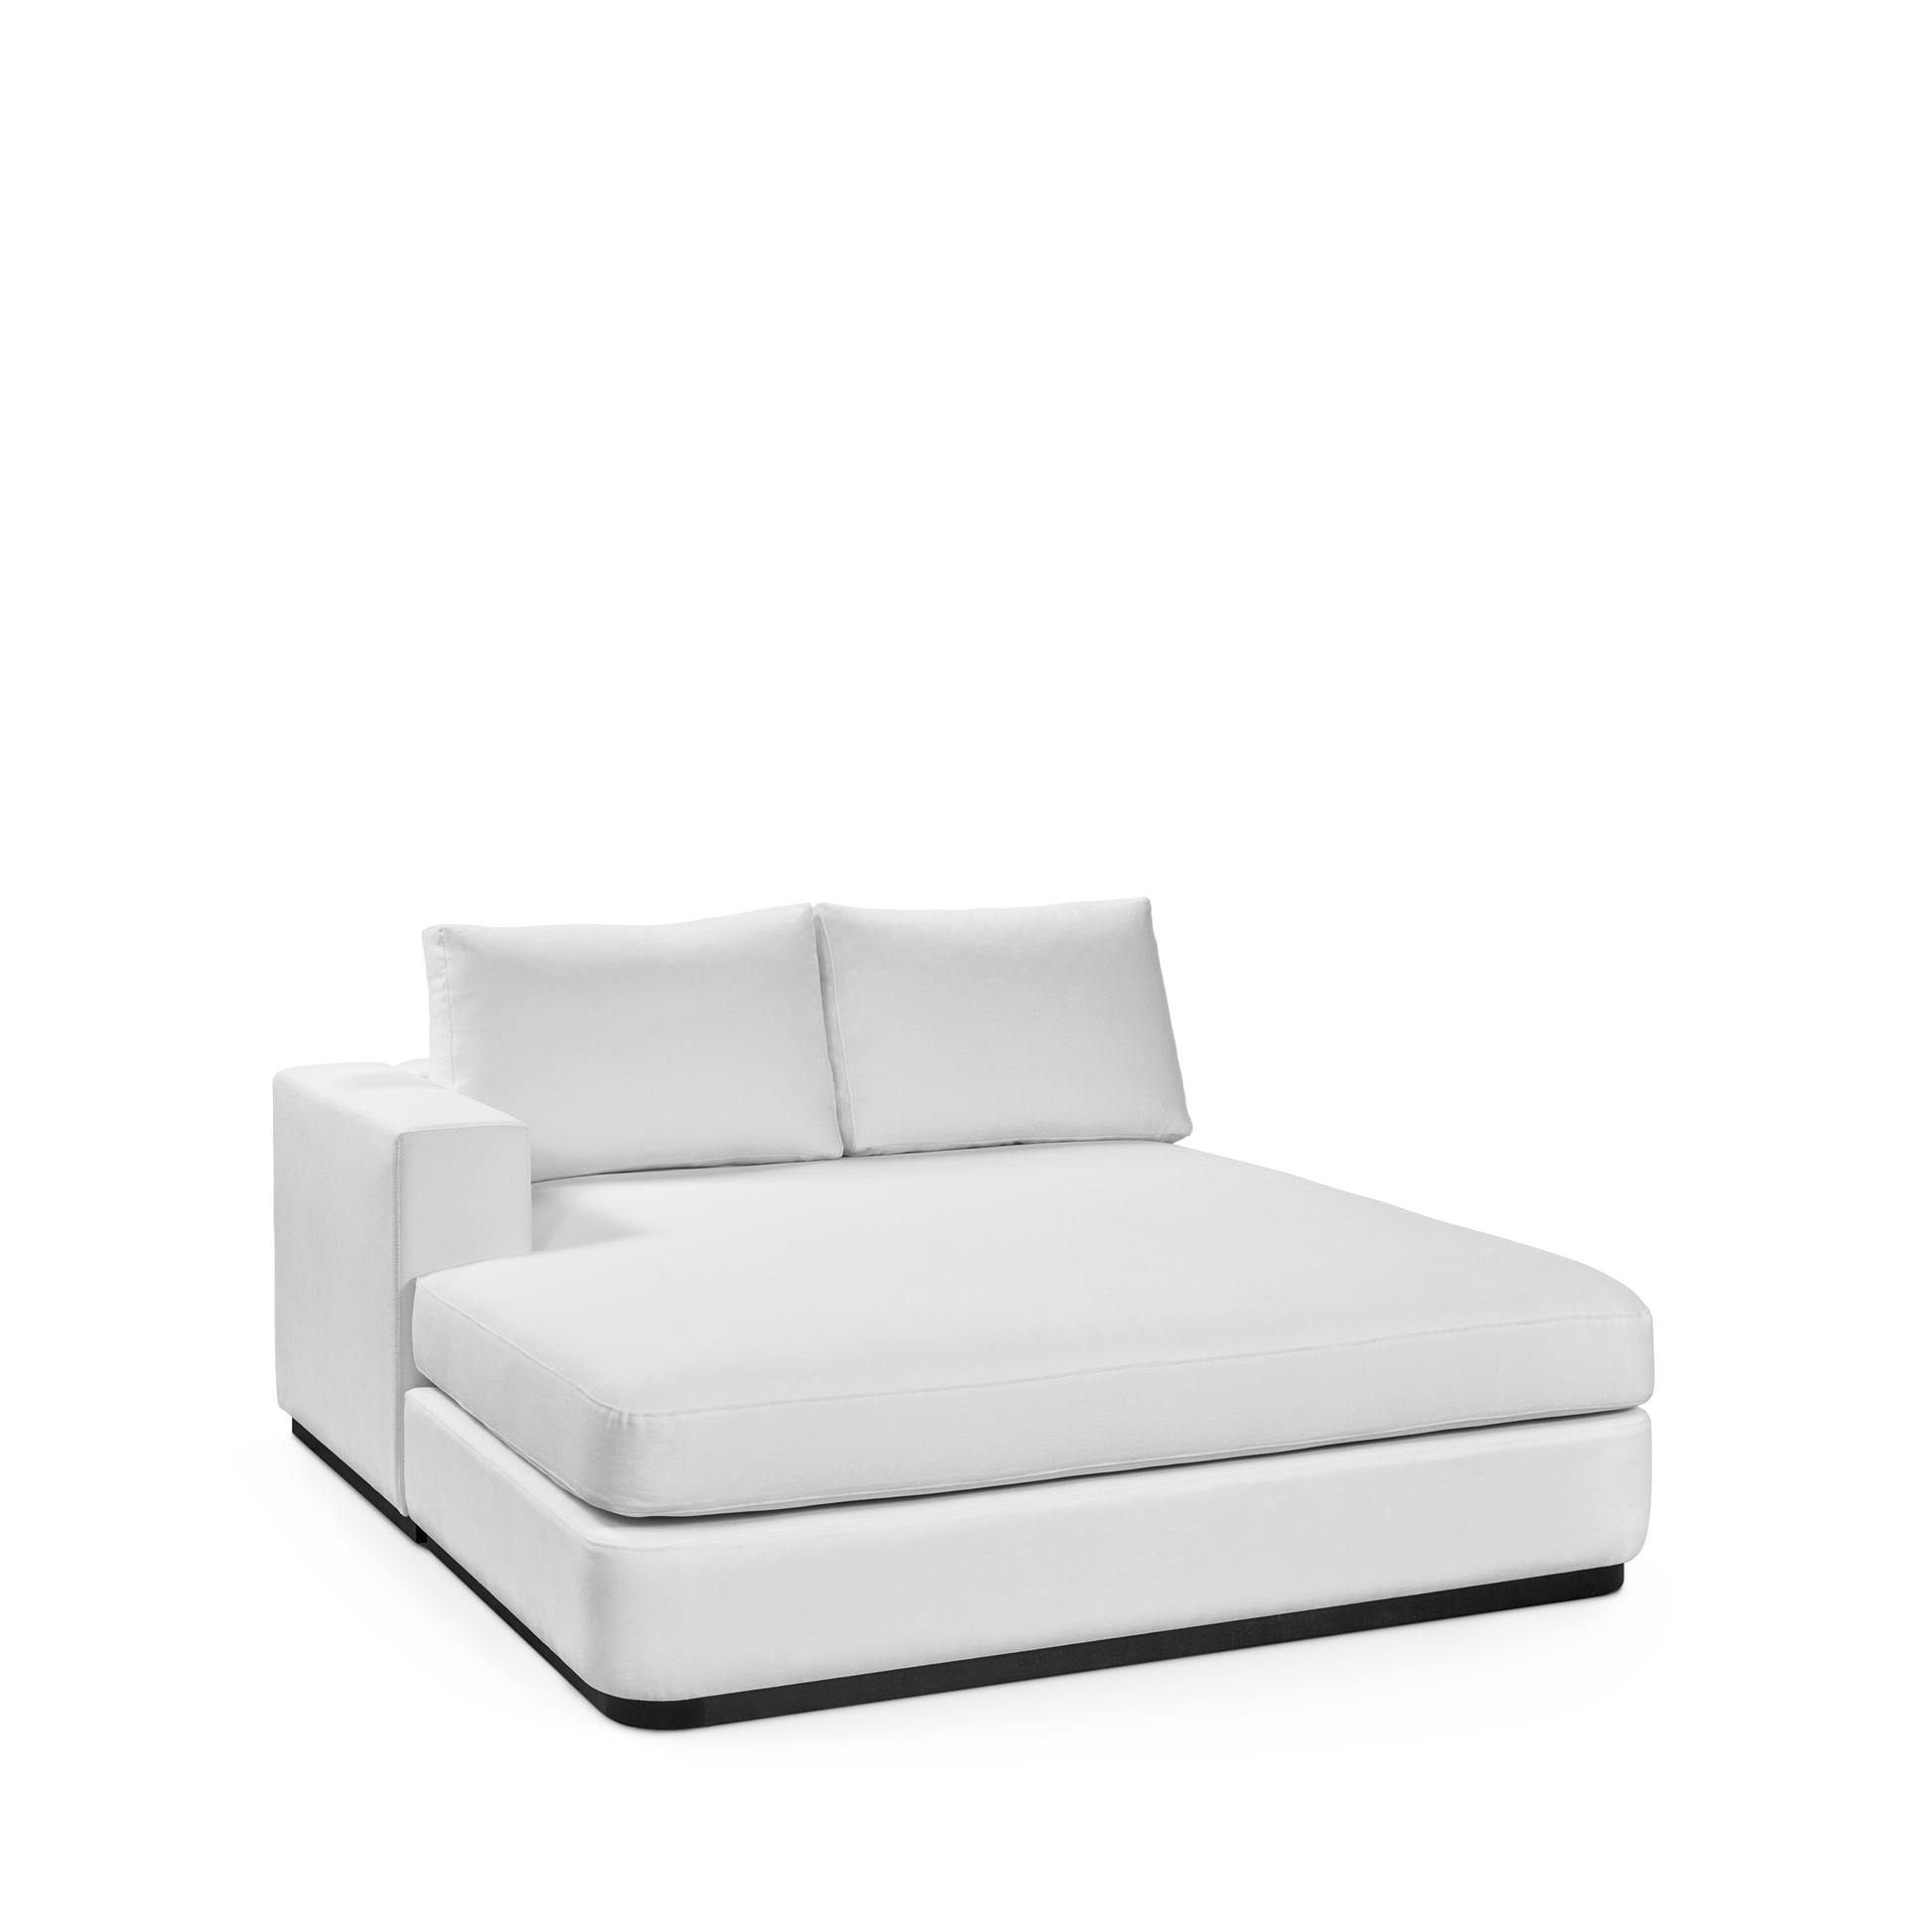 ATLAS 160 Lounge Bed arm rest left with linara white textile